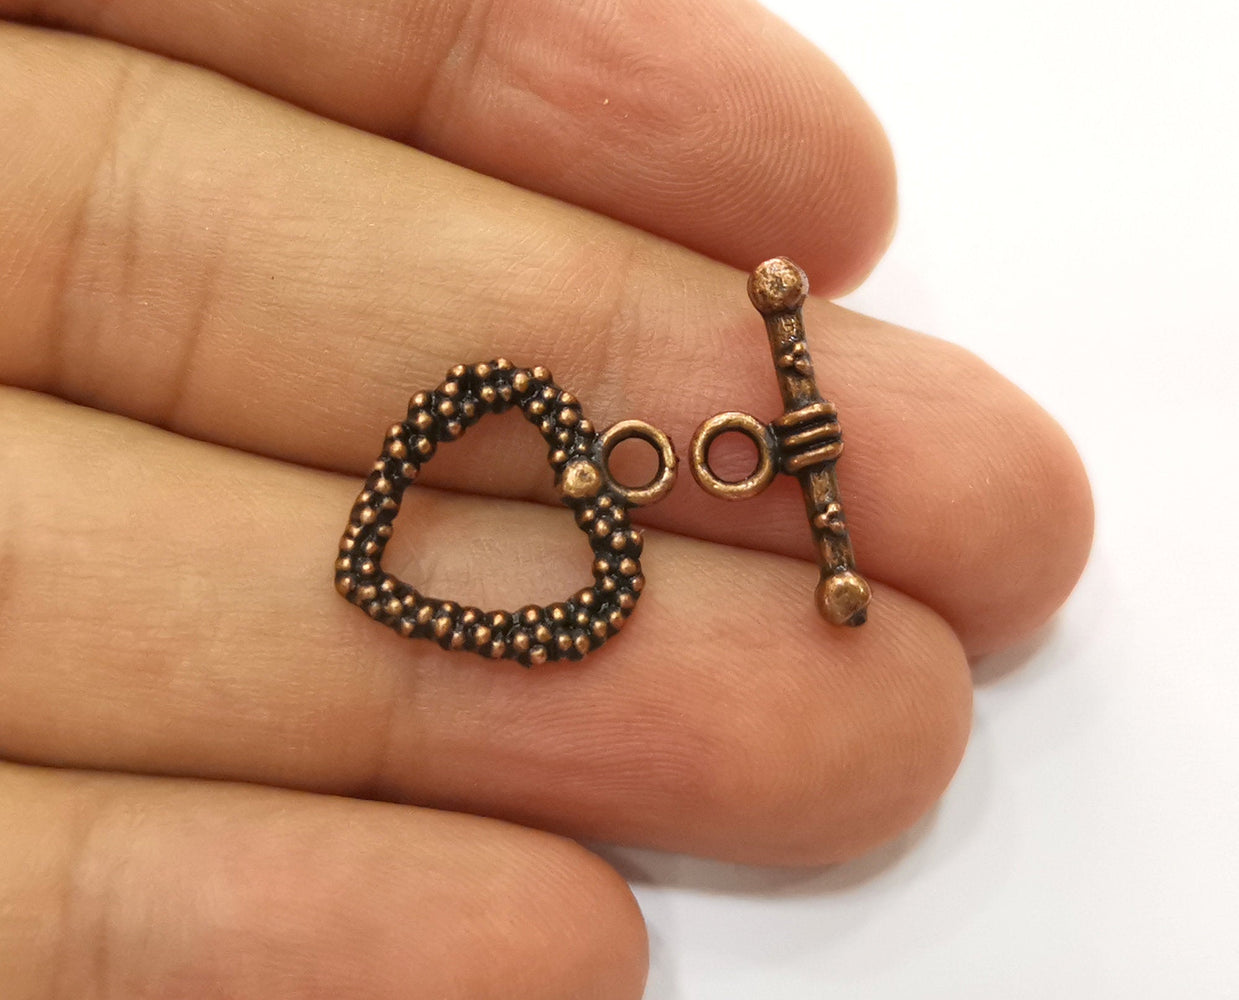 Heart Toggle Clasps 10 sets Antique Copper Plated Toggle Clasp Findings 19x16mm+19x8mm  G18733